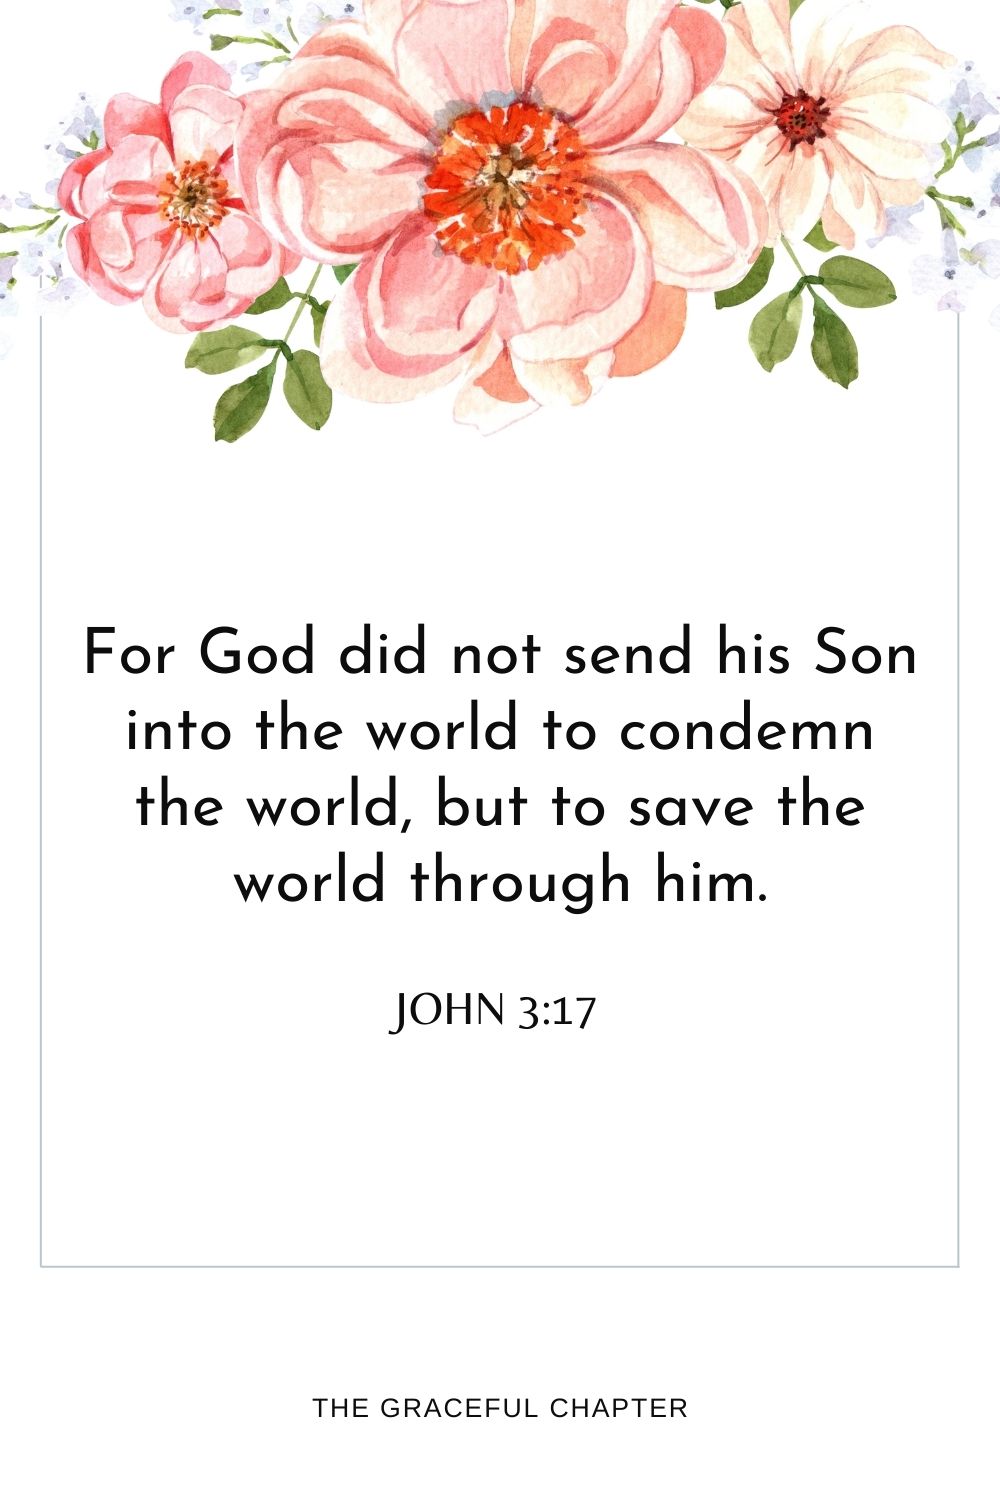 For God did not send his Son into the world to condemn the world, but to save the world through him. John 3:17